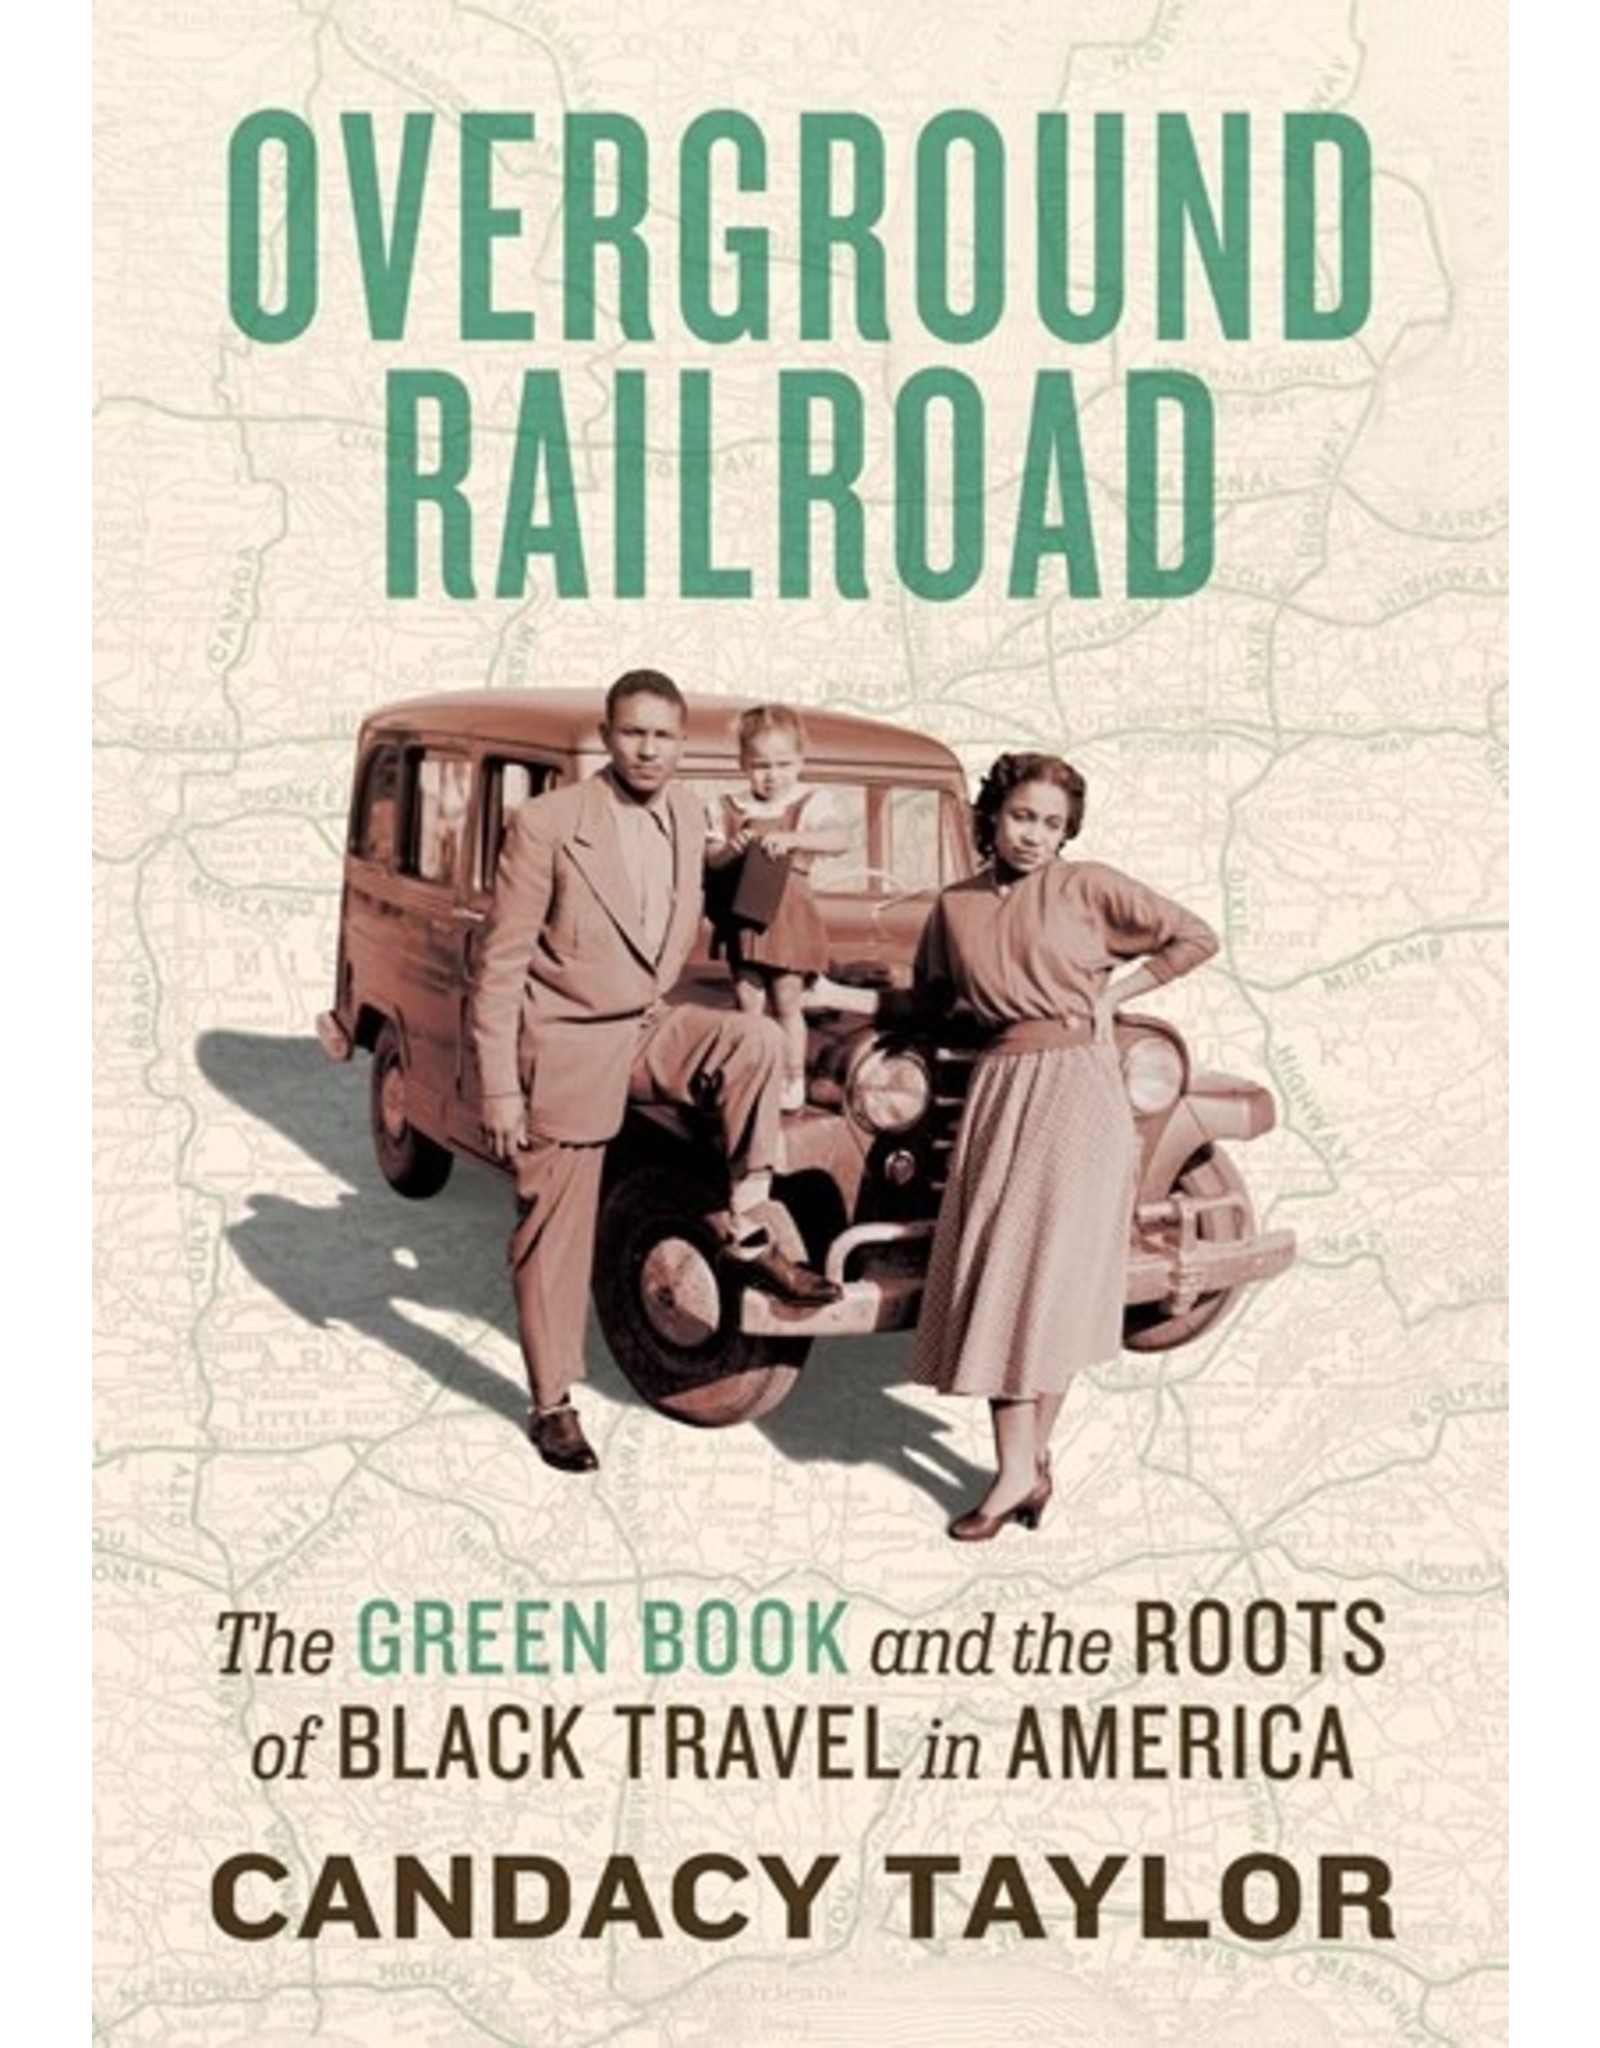 Books Overground Railroad by Candacy Taylor (Black Friday)